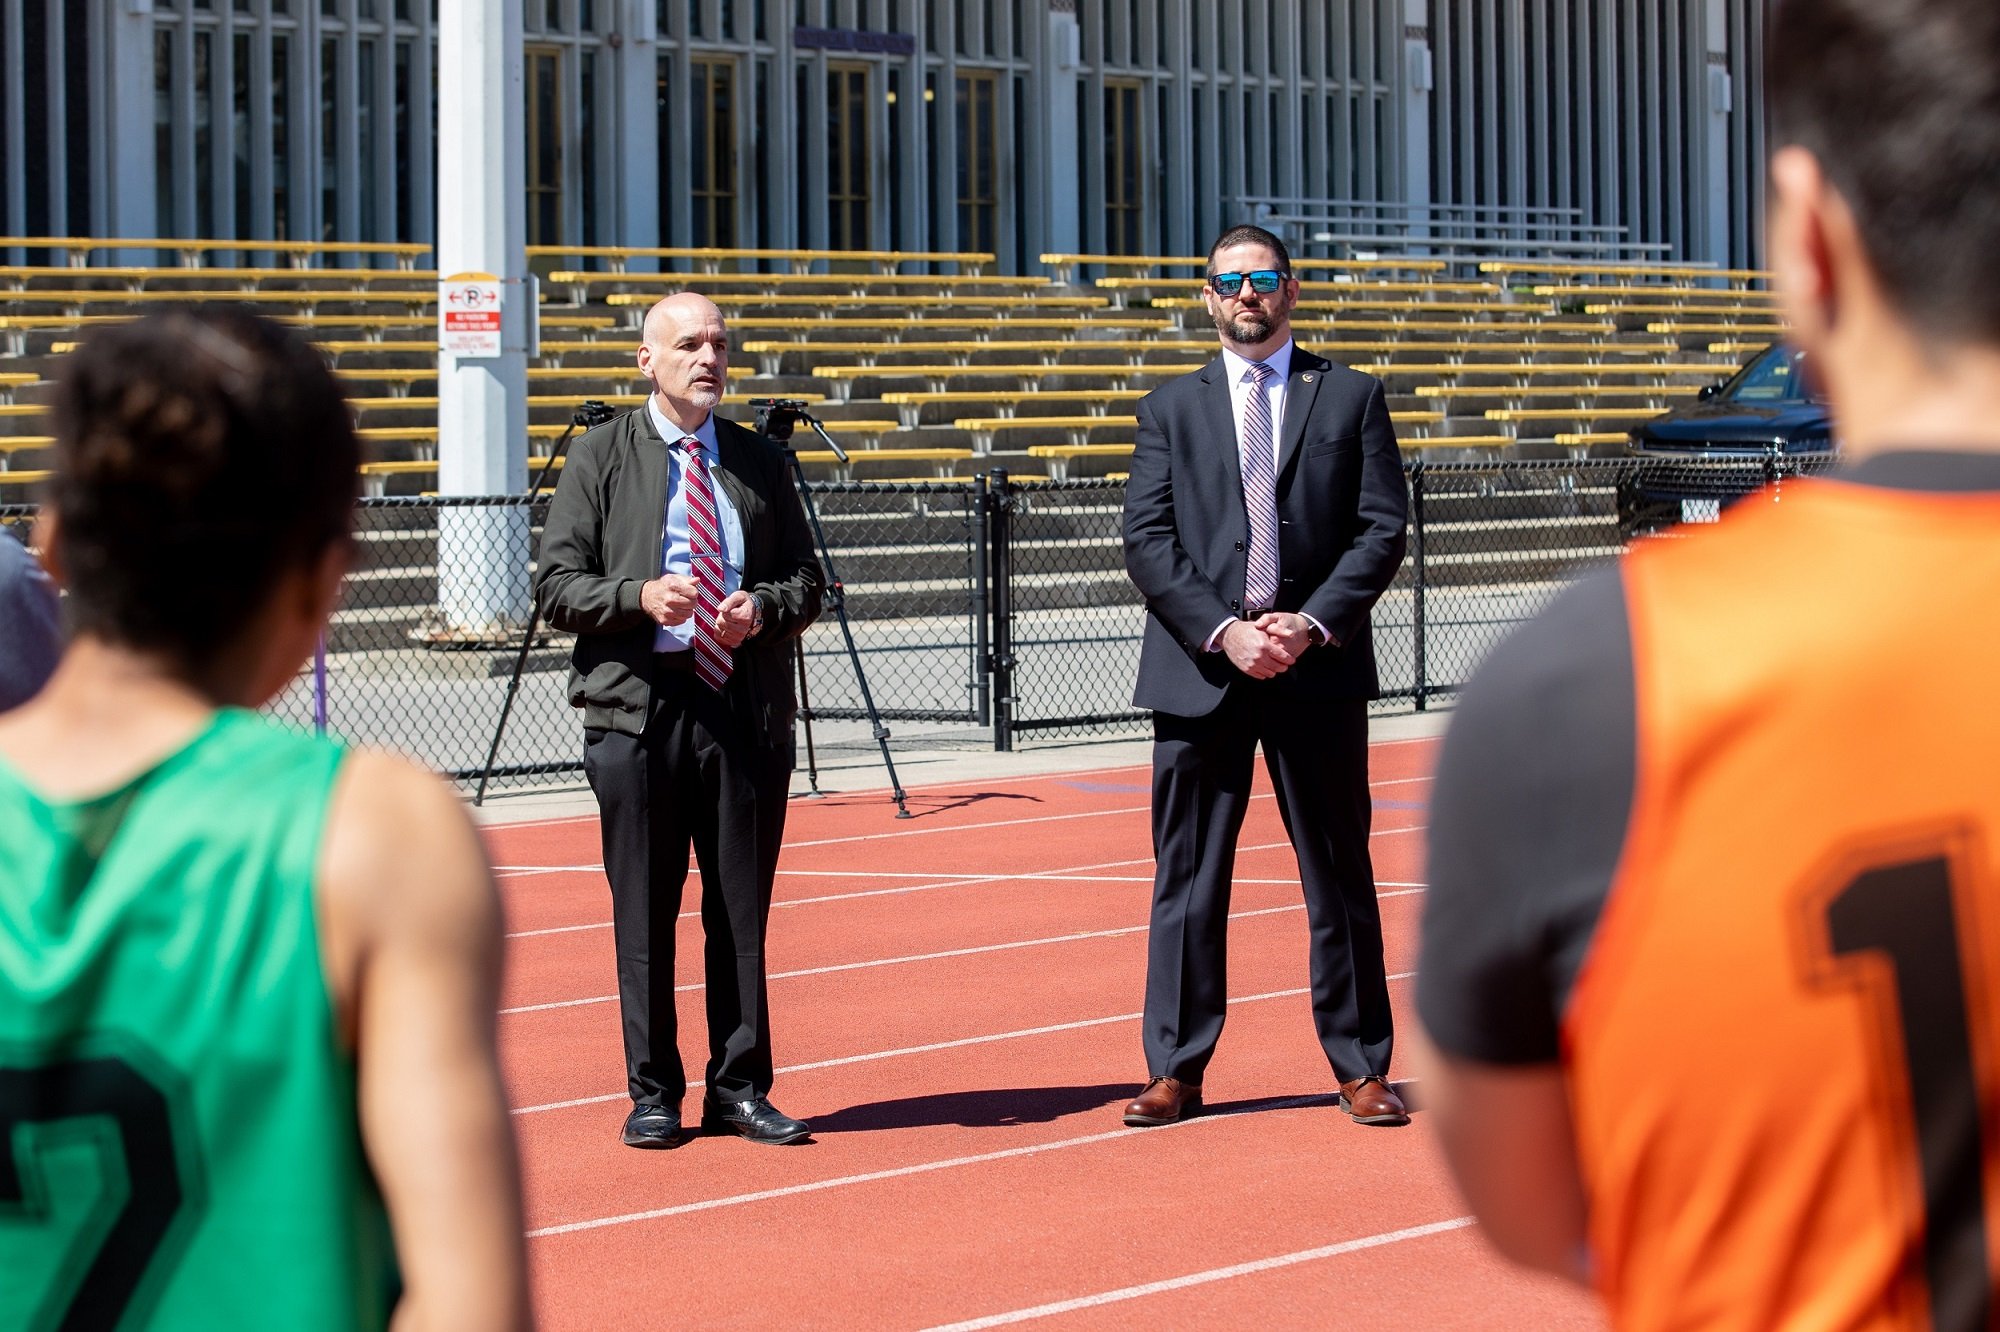 CEHC Dean Robert Griffin and Tremaroli, special agent in charge of the FBI Albany Field Office, talk with students before the start of the physical fitness test at UAlbany.